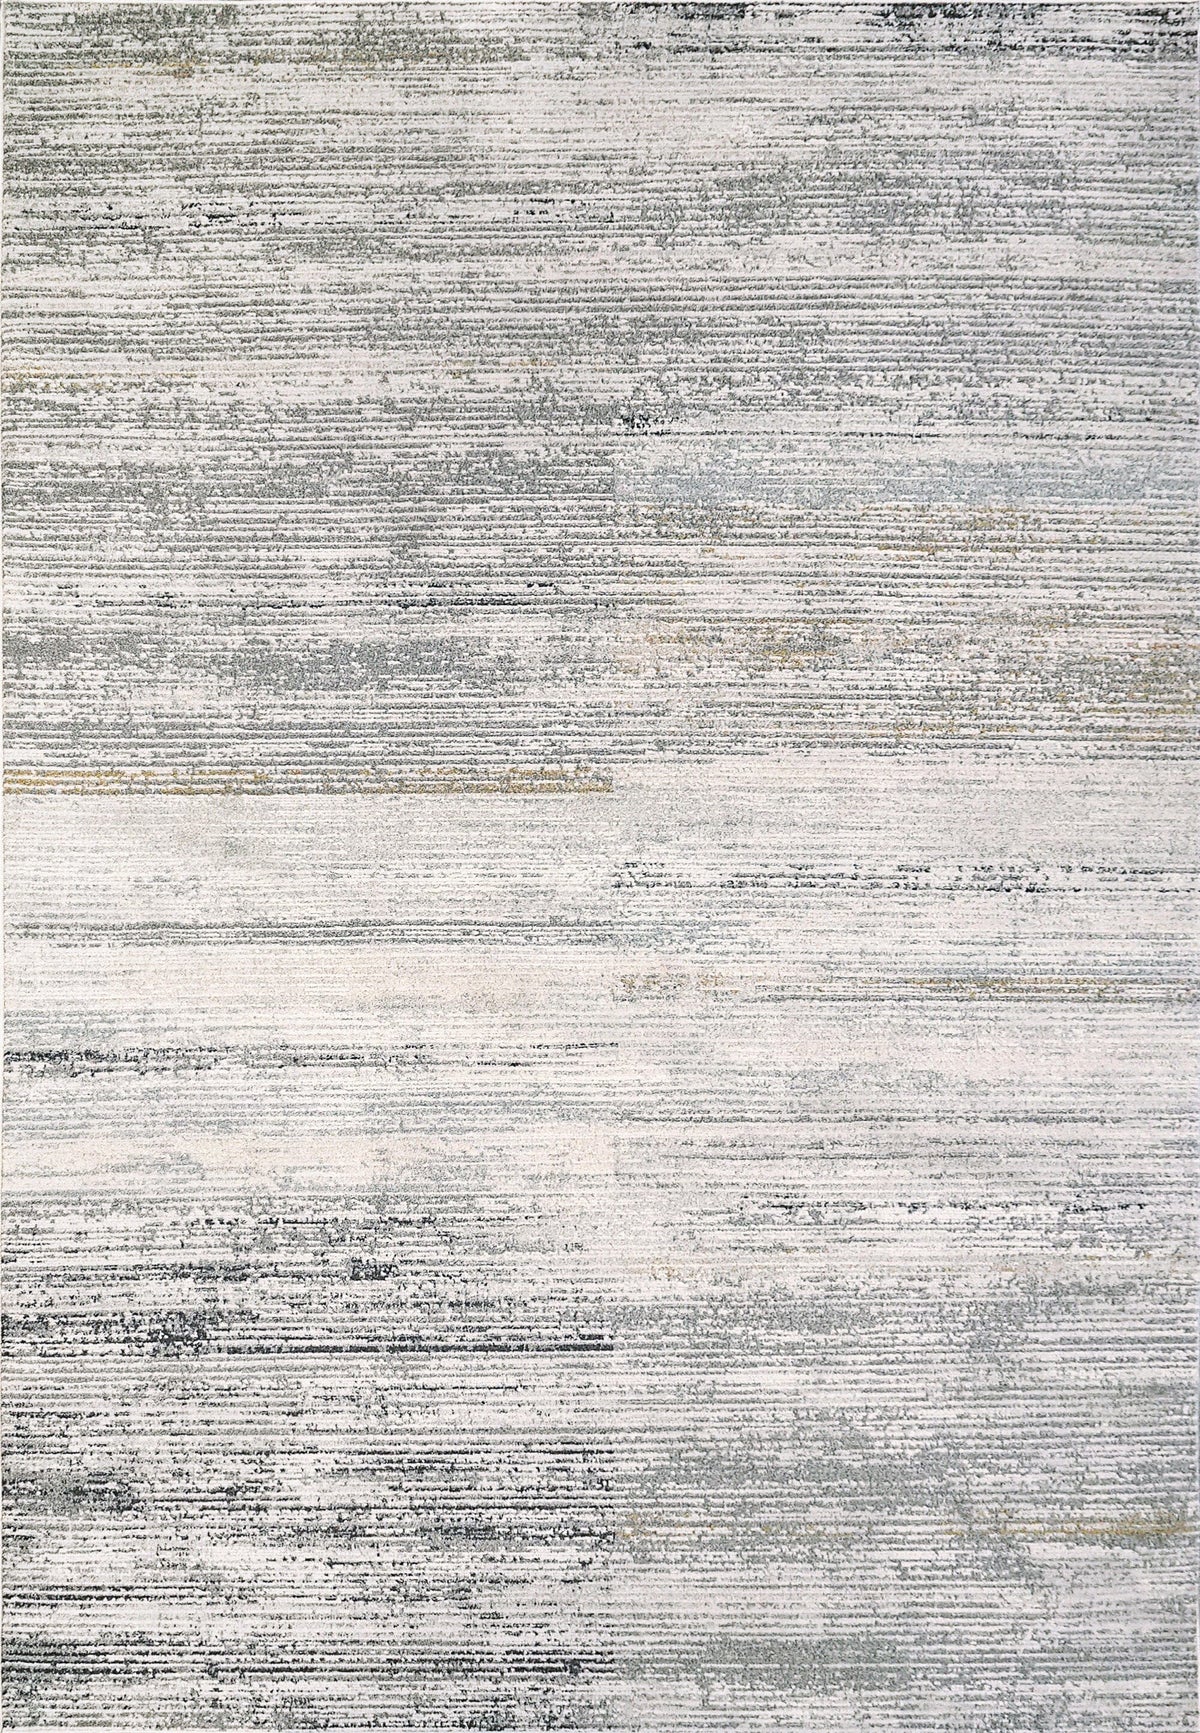 Anne Klein Grey/Beige/Charcoal The Nobility Modern Abstract Rug Collection